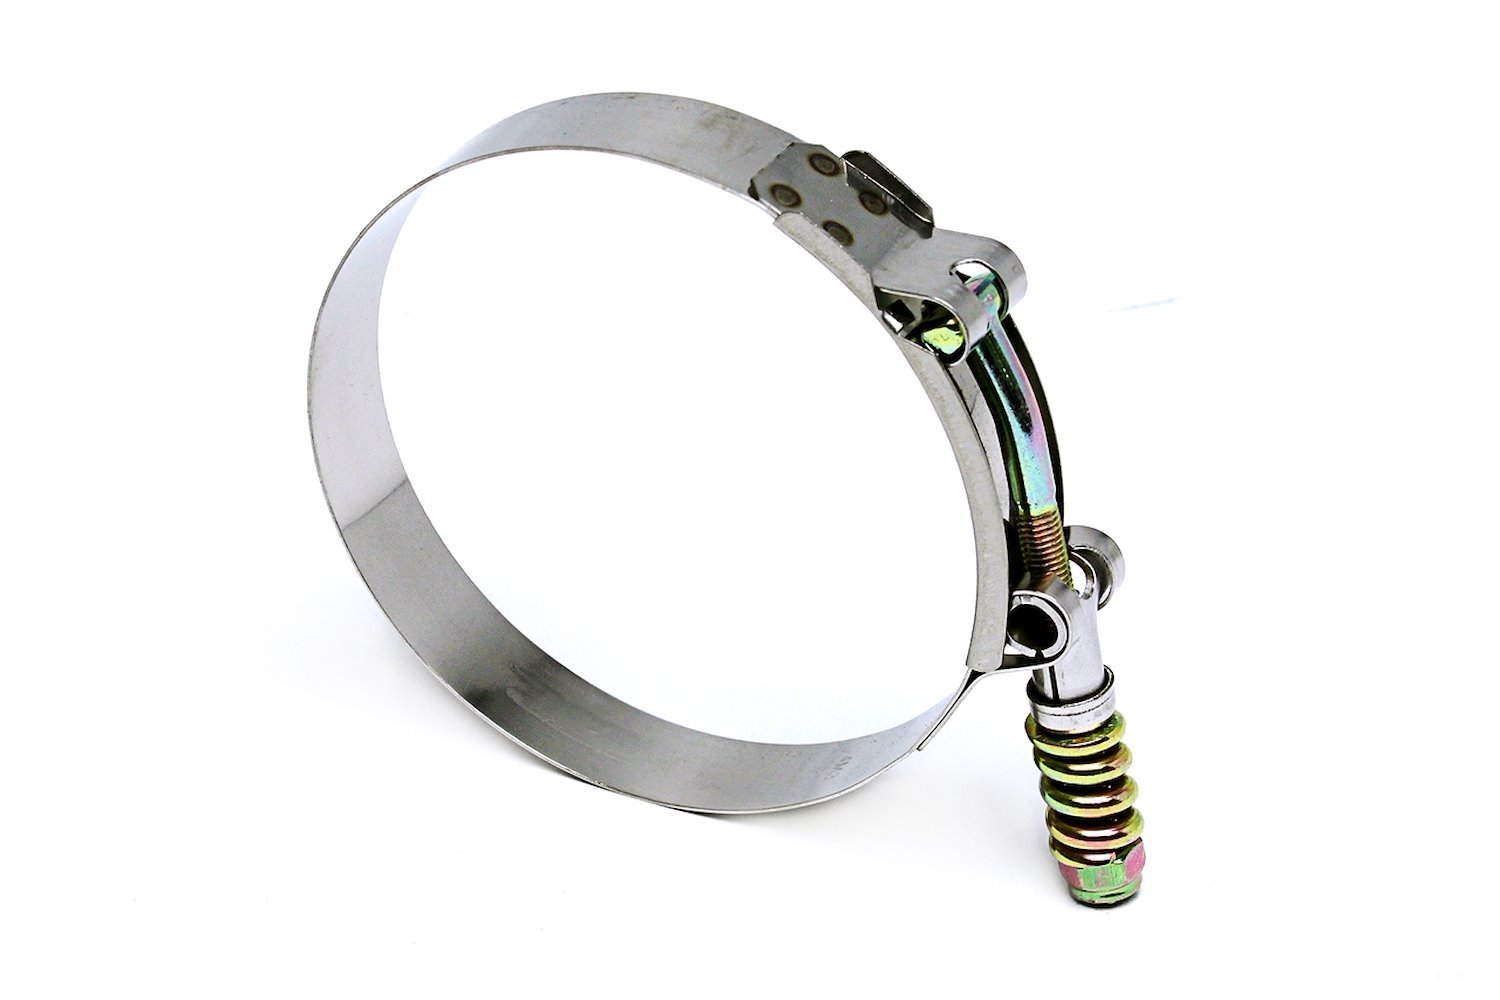 SLTC-425 Stainless Steel Spring Loaded T-Bolt Hose Clamp, Size #108, Range: 4.25 in.-4.57 in.